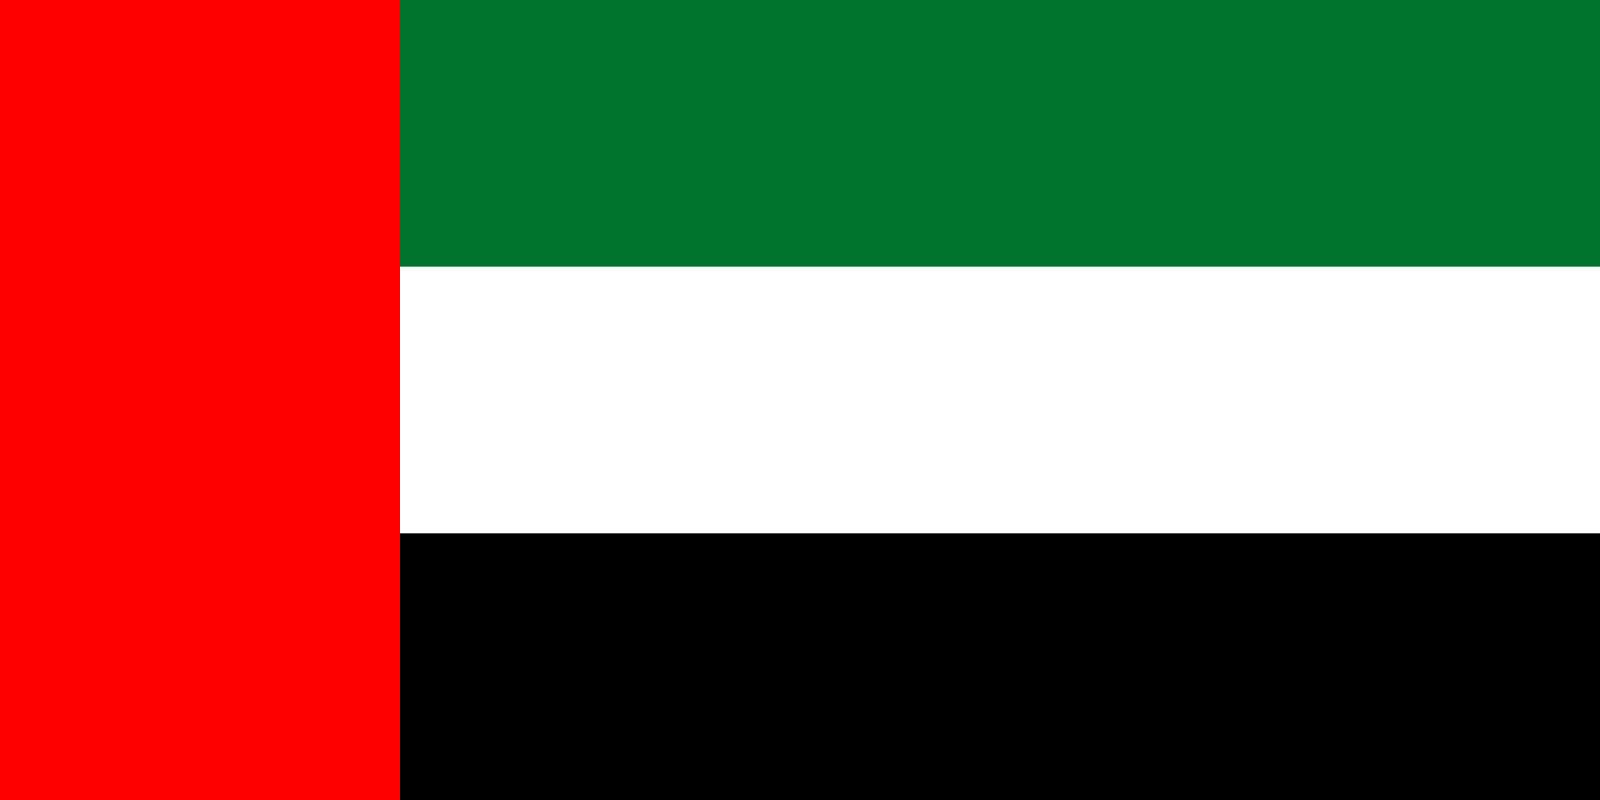 UAE Flag puzzle online from photo